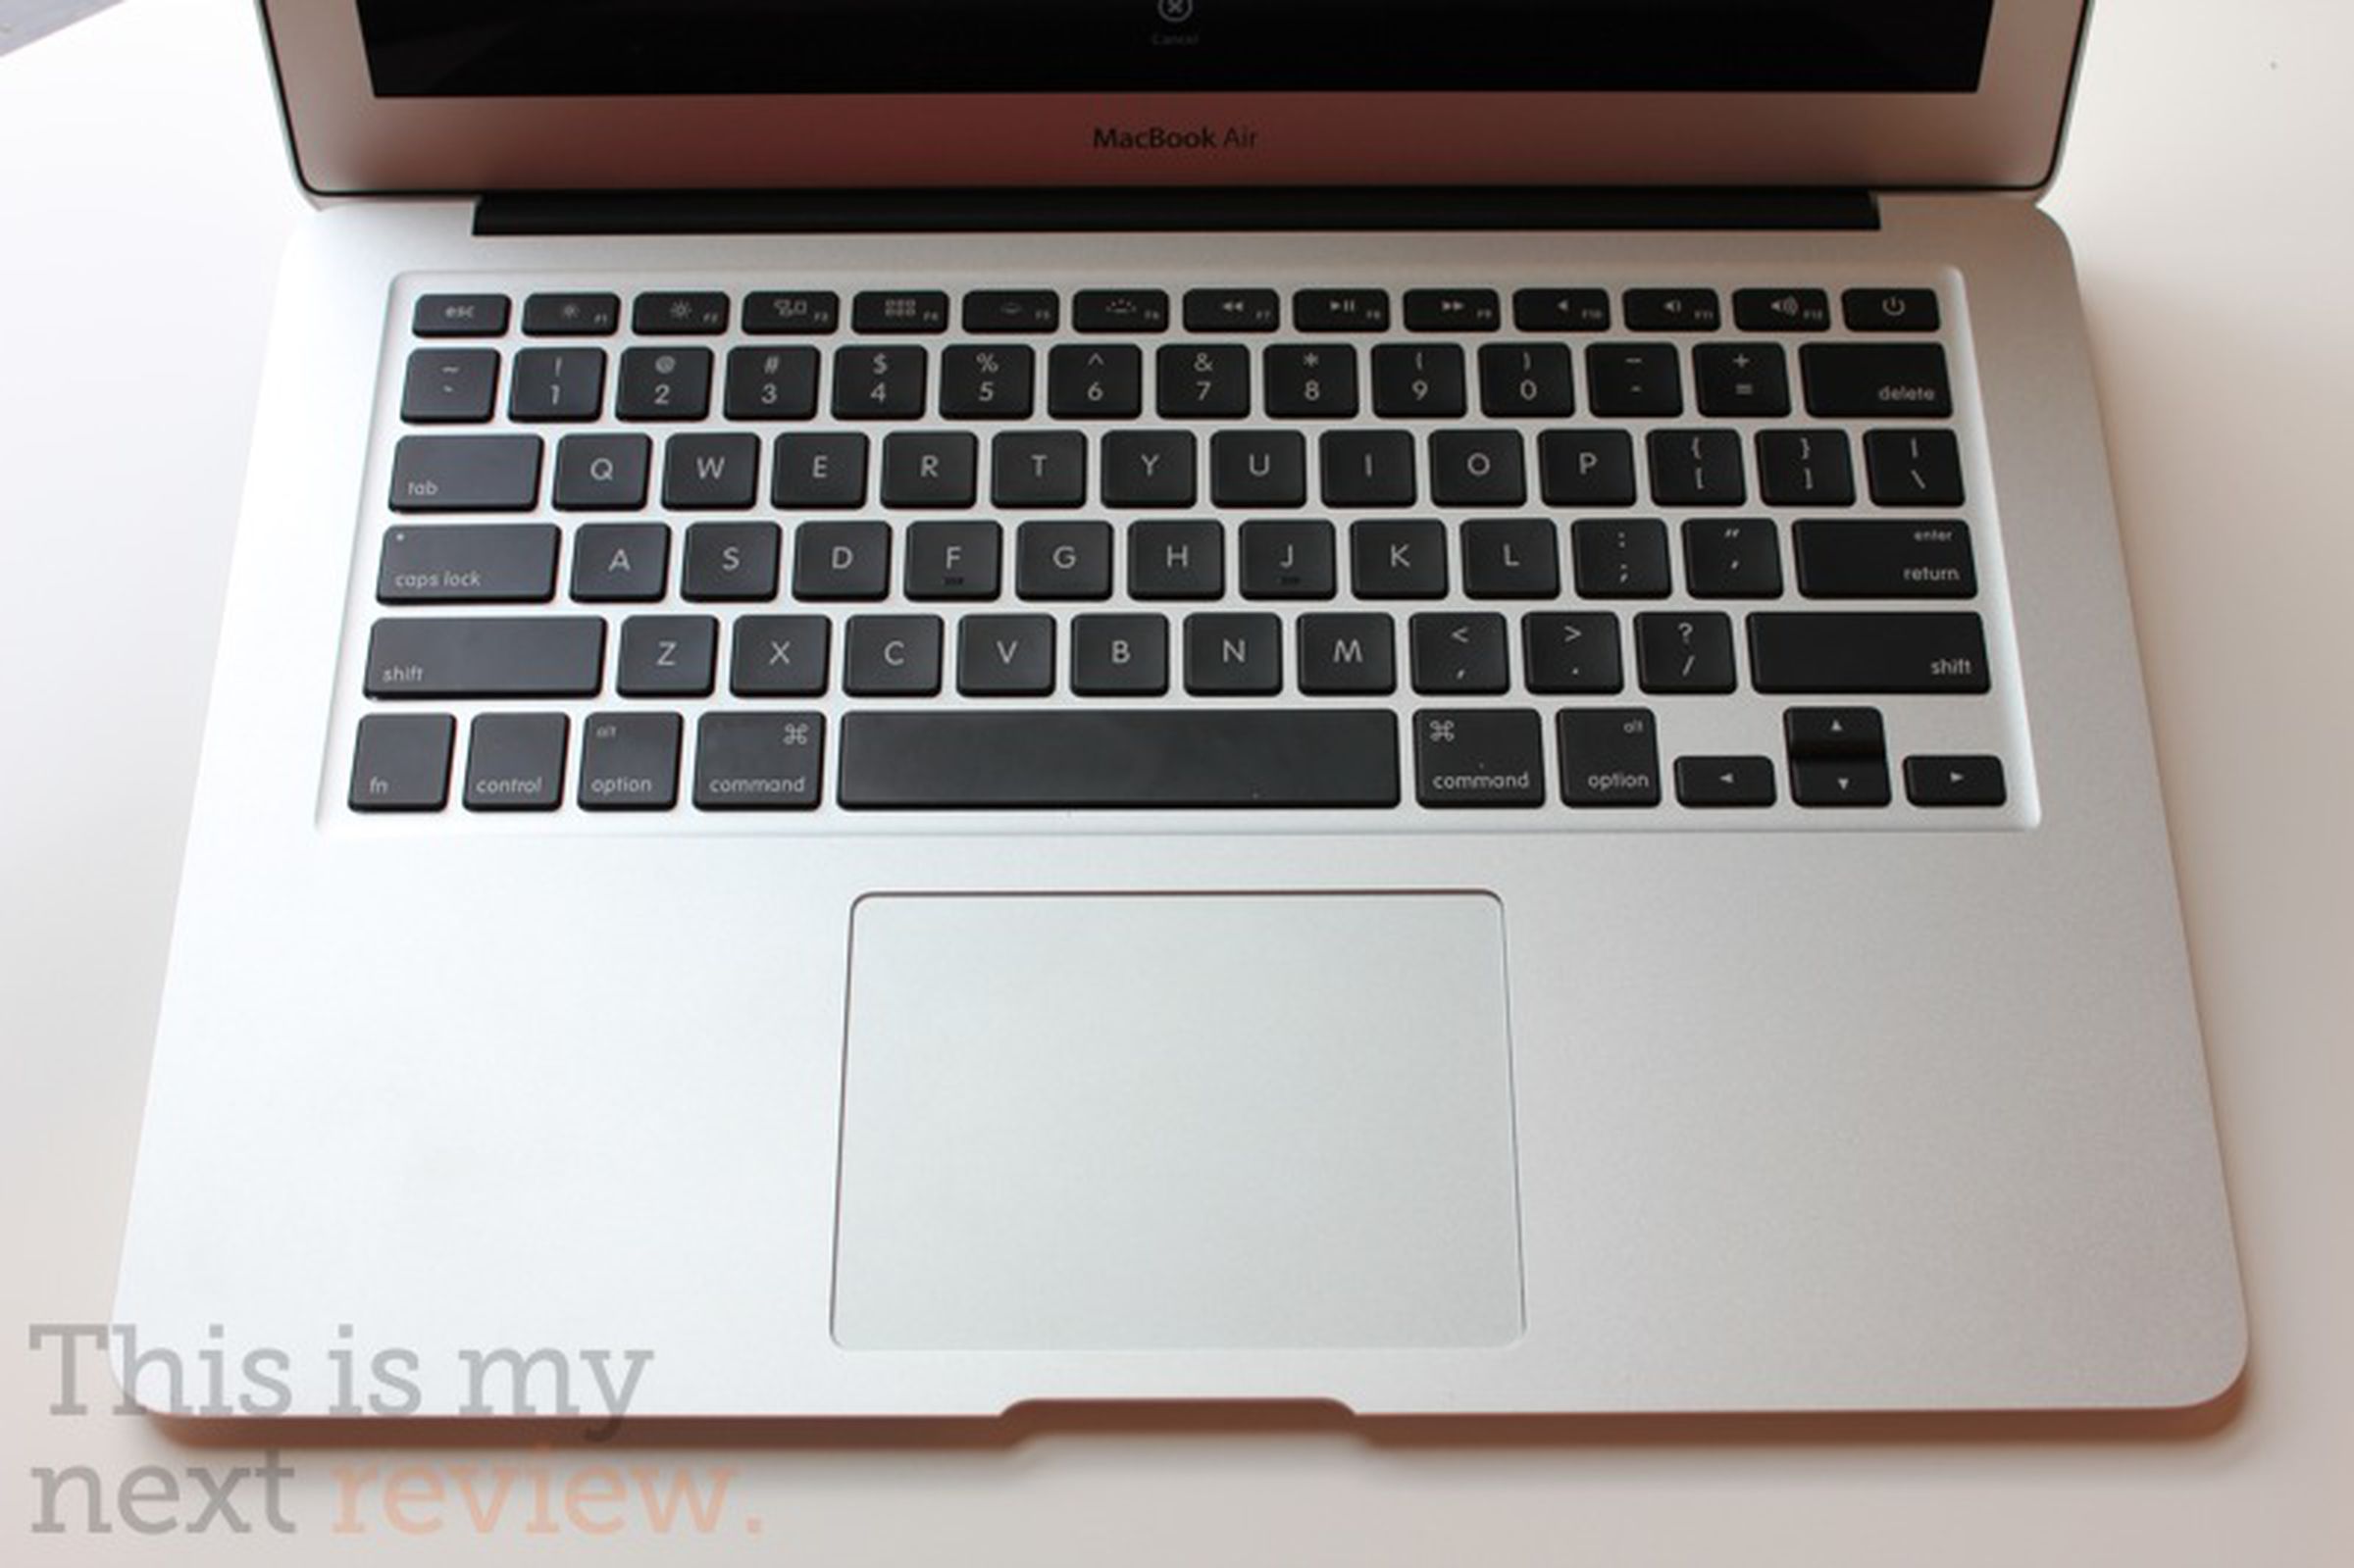 Apple MacBook Air review pictures (13-inch, mid 2011)